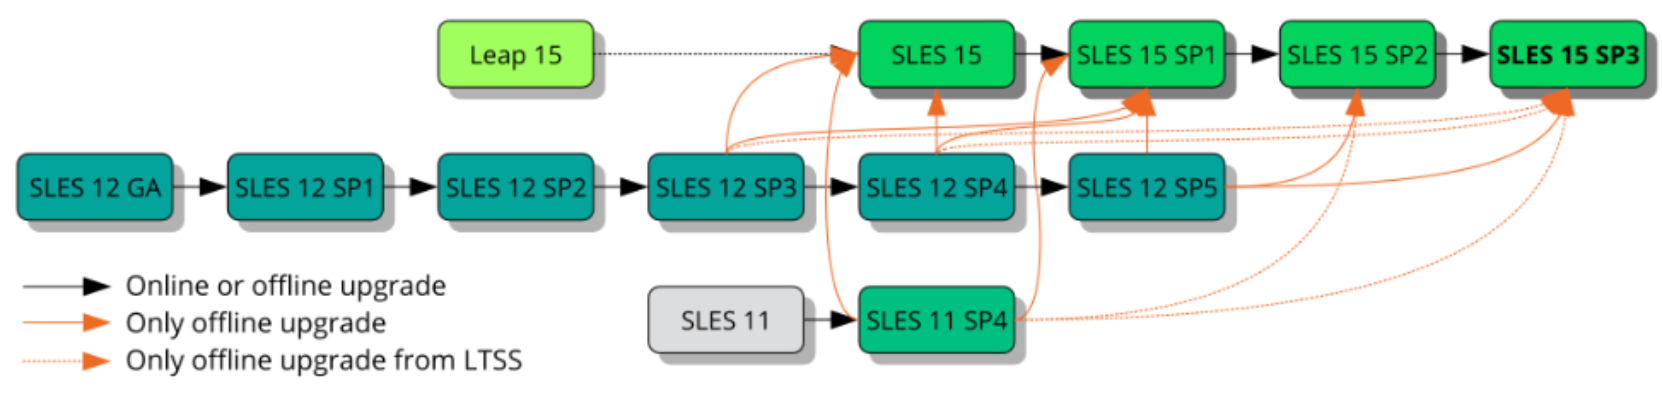 The figure represents the upgrade path, starting with SLES 12 GA on the left and progressing to SLES 15 SP3.